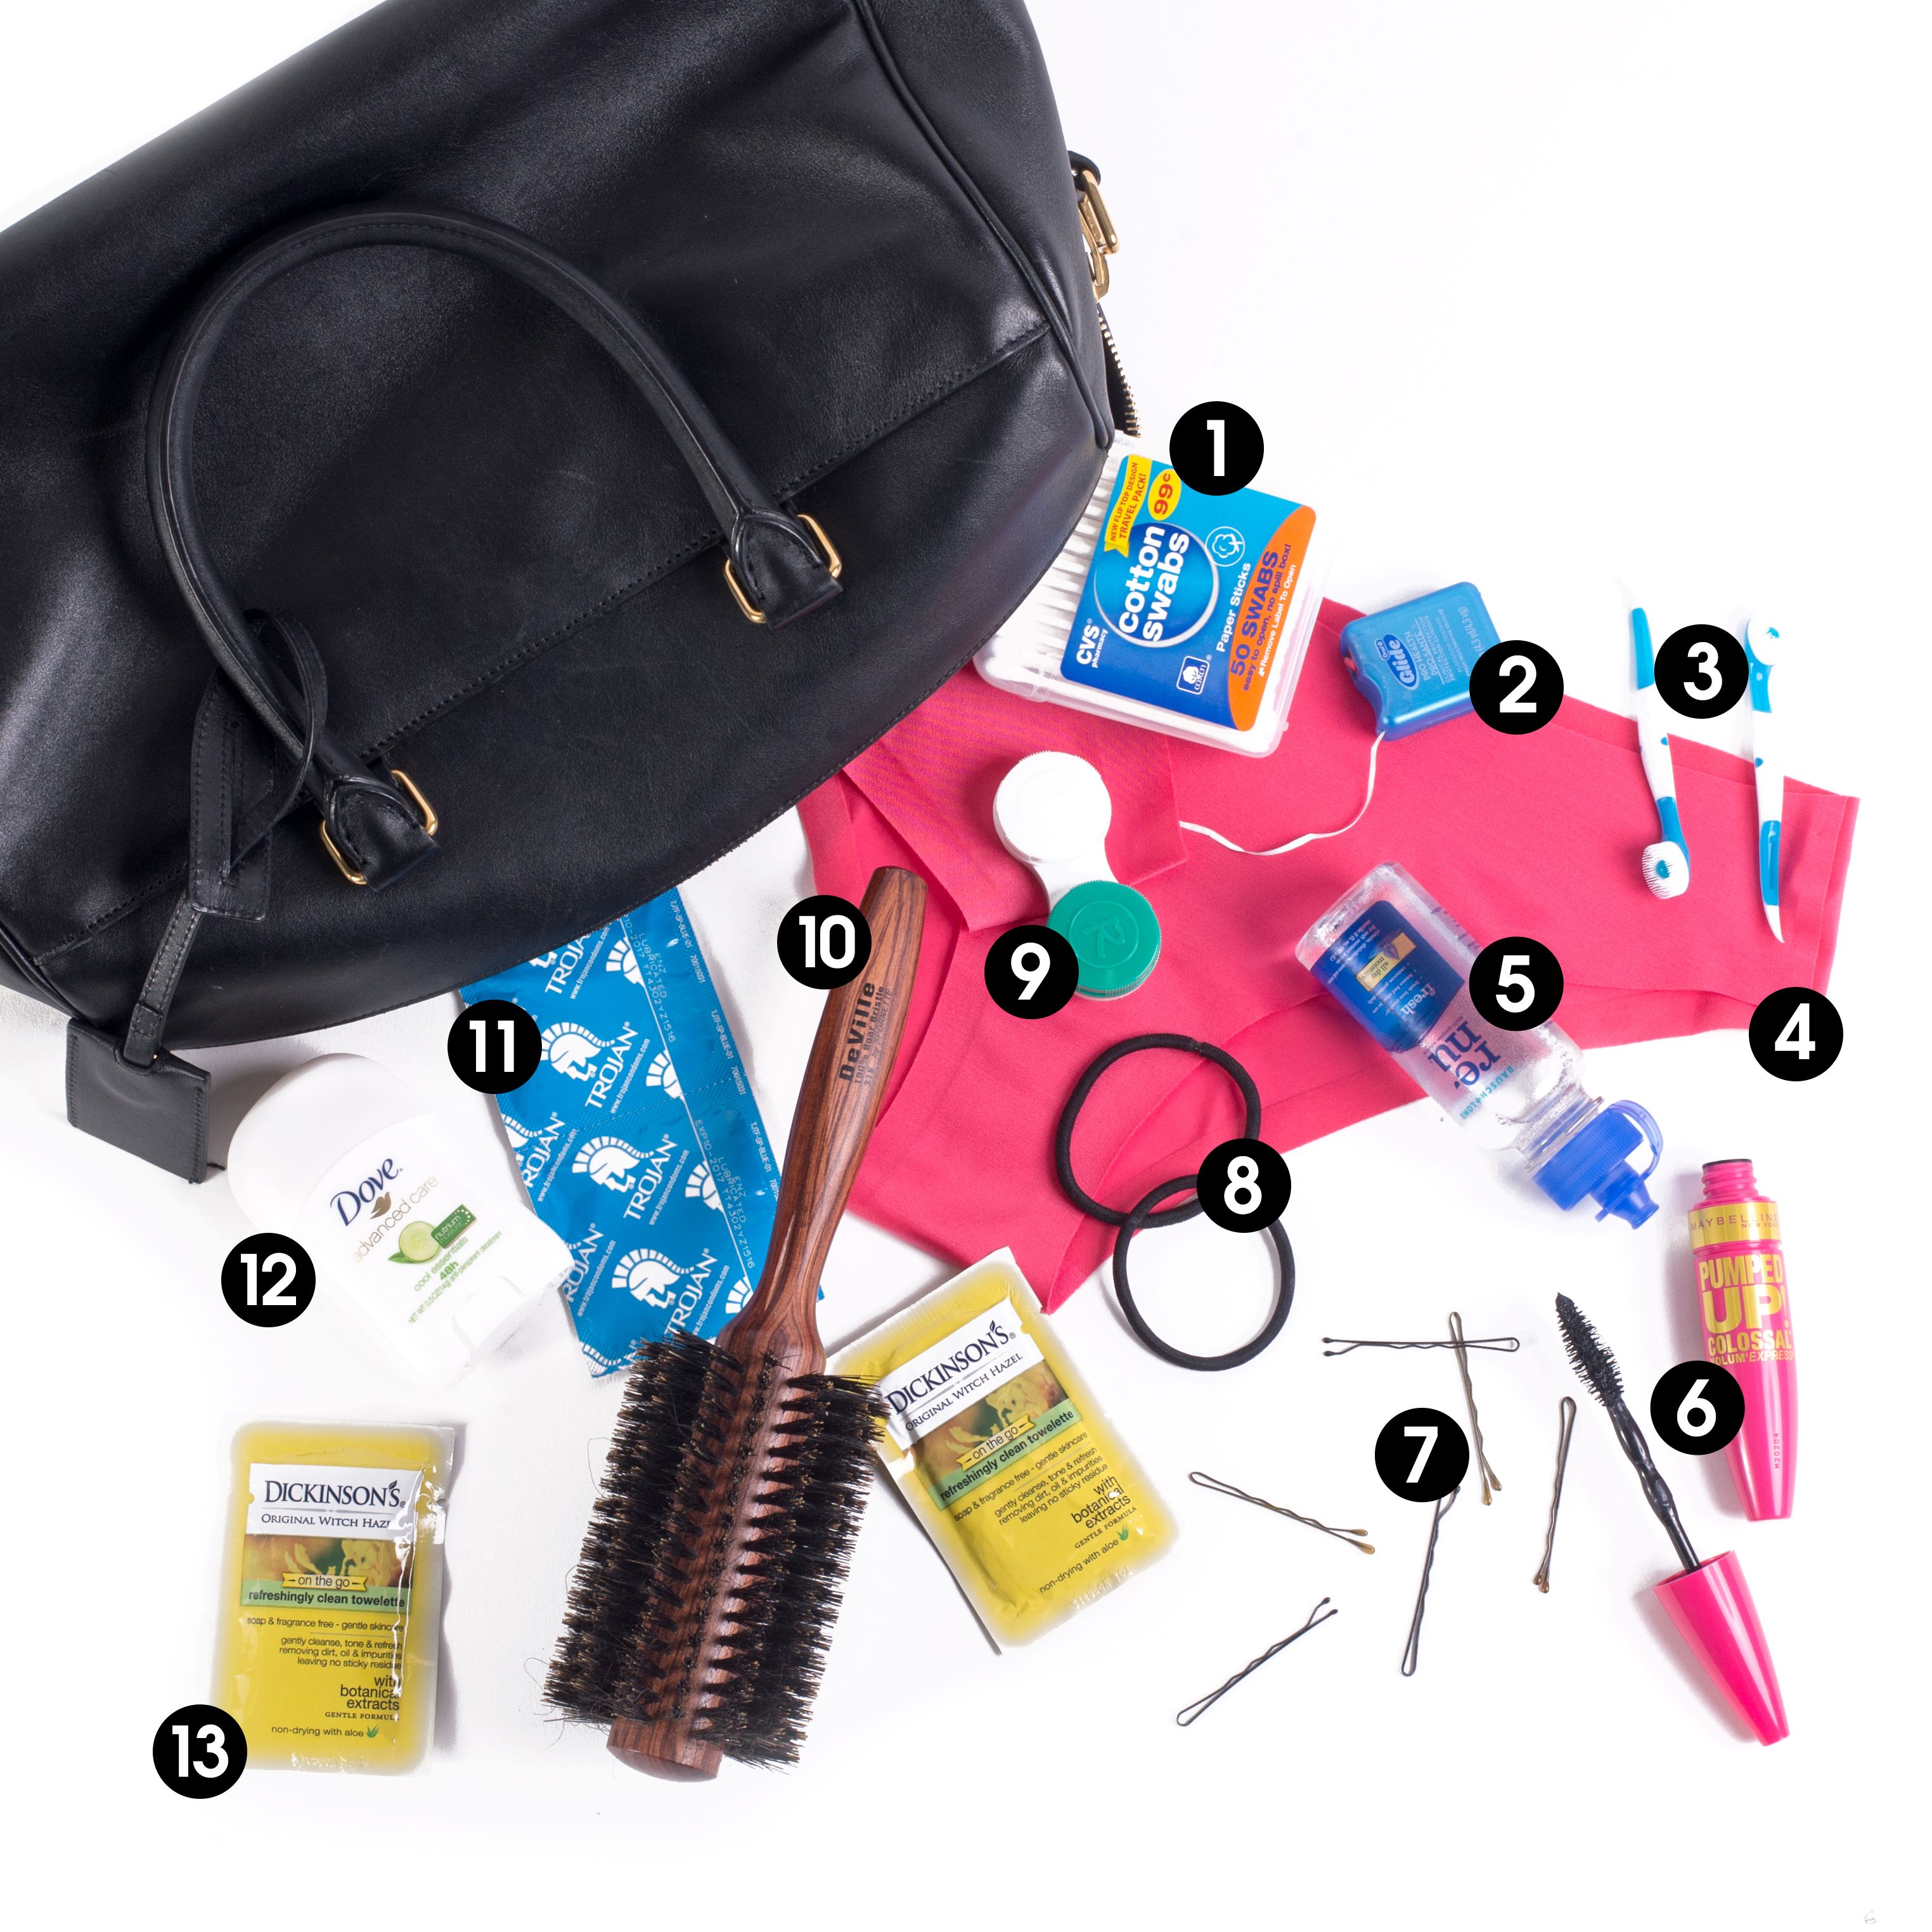 How to Pack an Overnight Bag for a Stay at Your Boyfriend's House